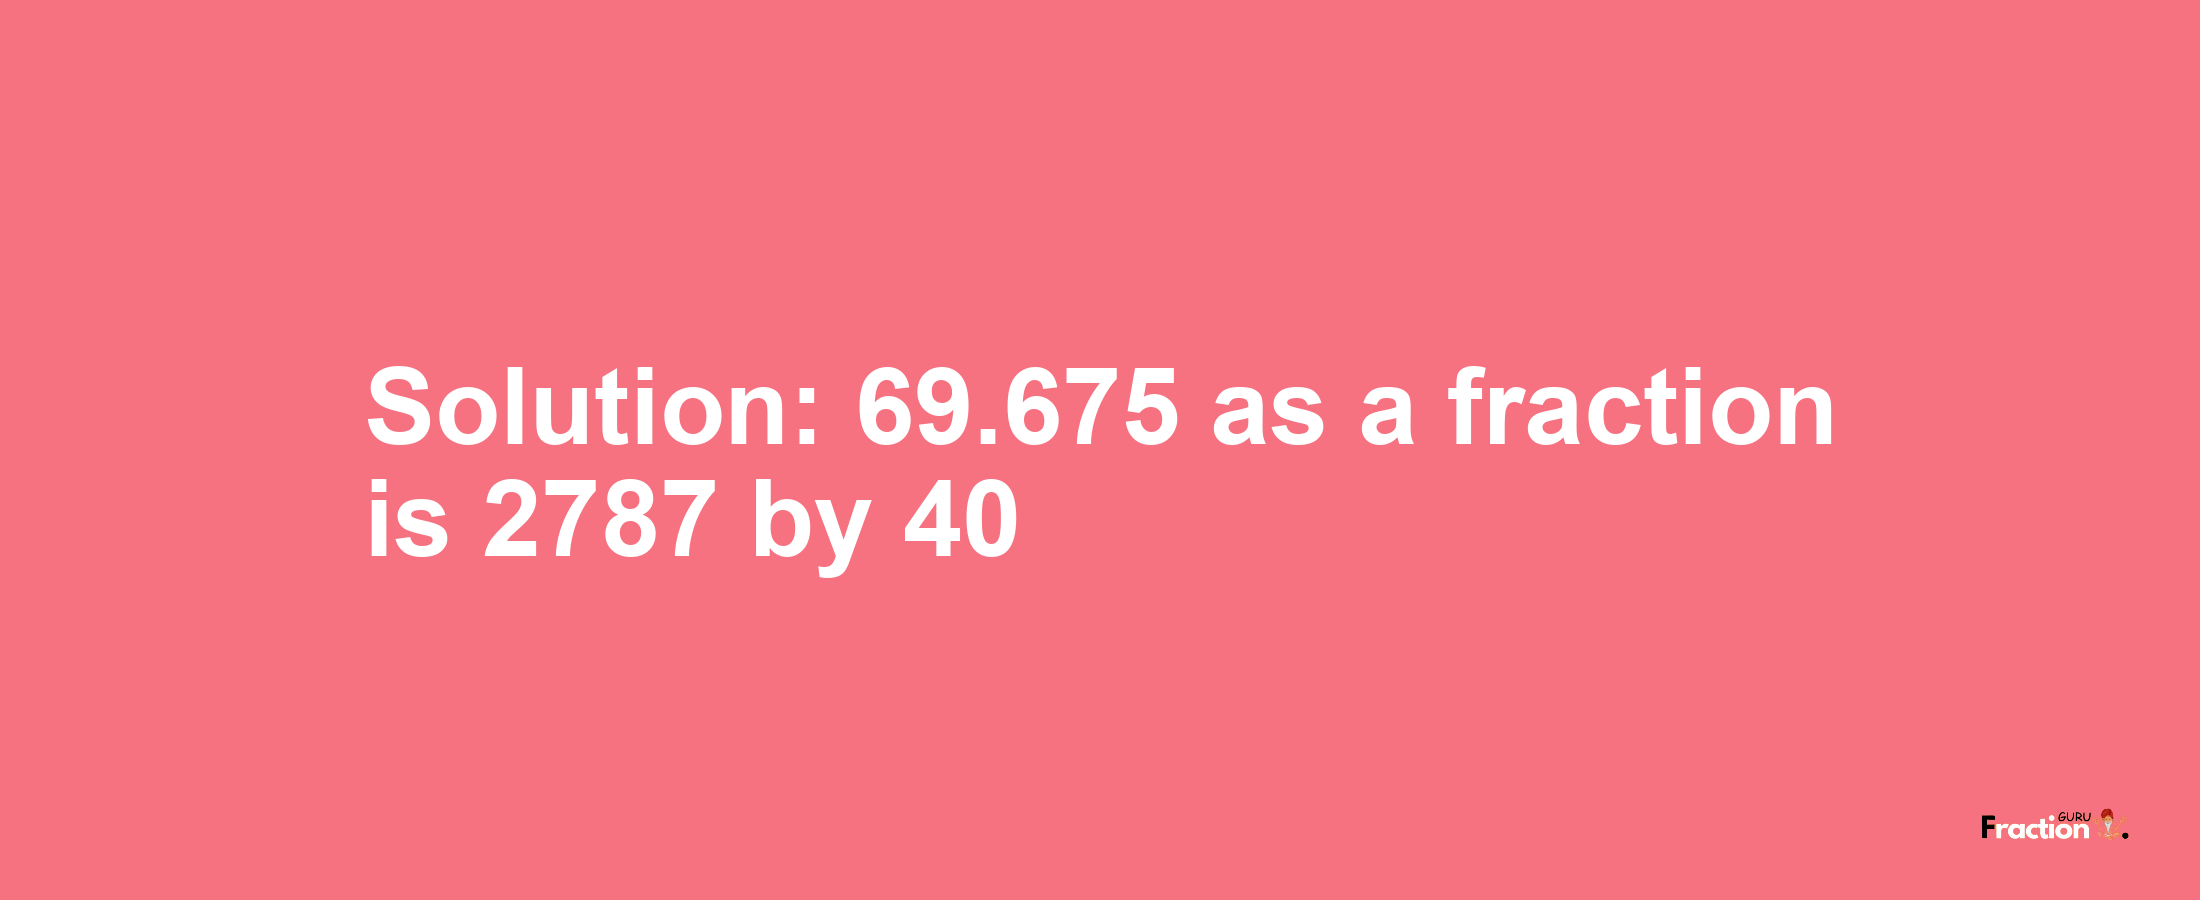 Solution:69.675 as a fraction is 2787/40